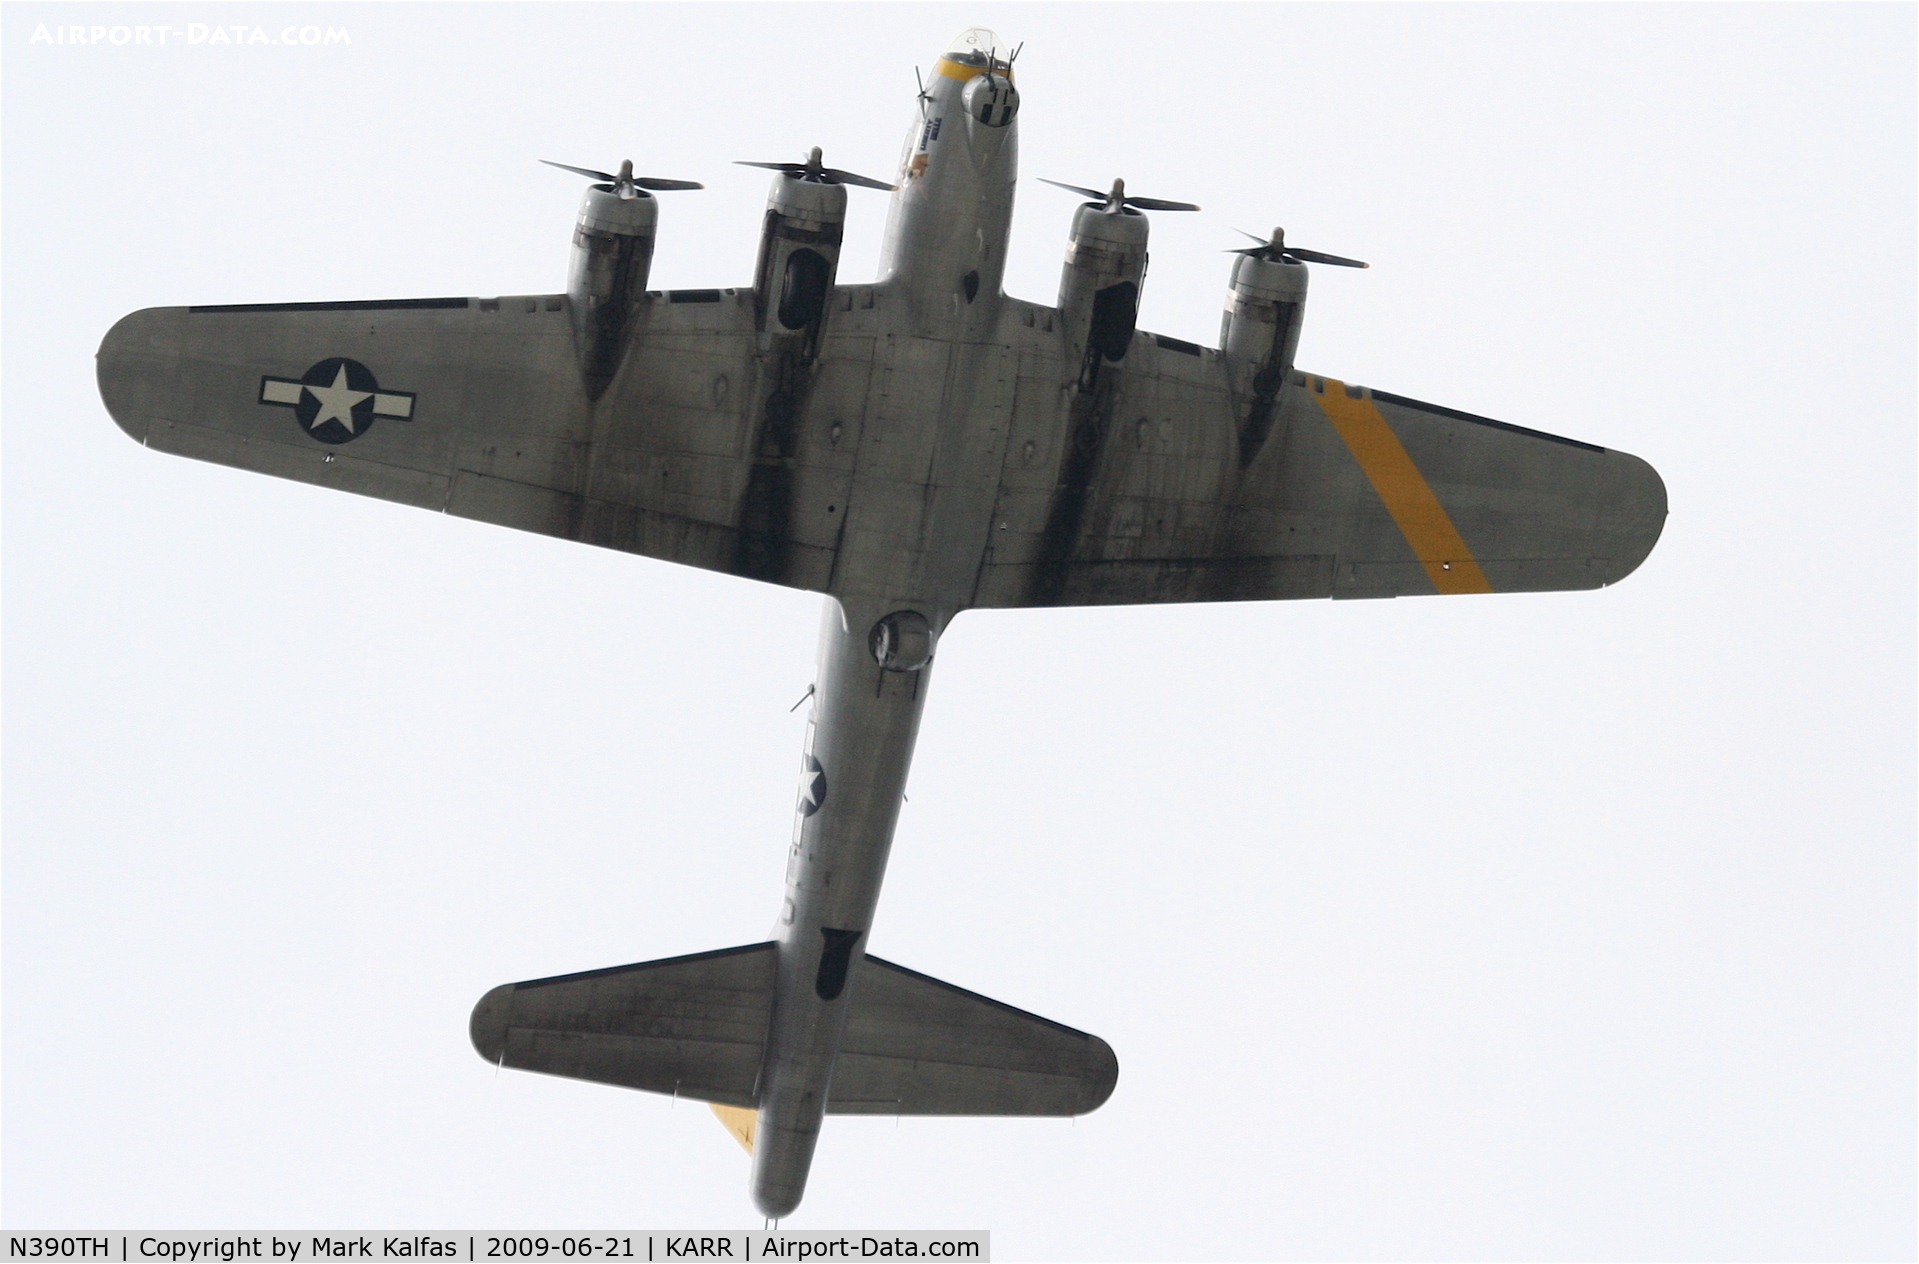 N390TH, 1944 Boeing B-17G Flying Fortress C/N Not found 44-85734, B-17G, North to South fly-by, over KARR TWR at 1000'